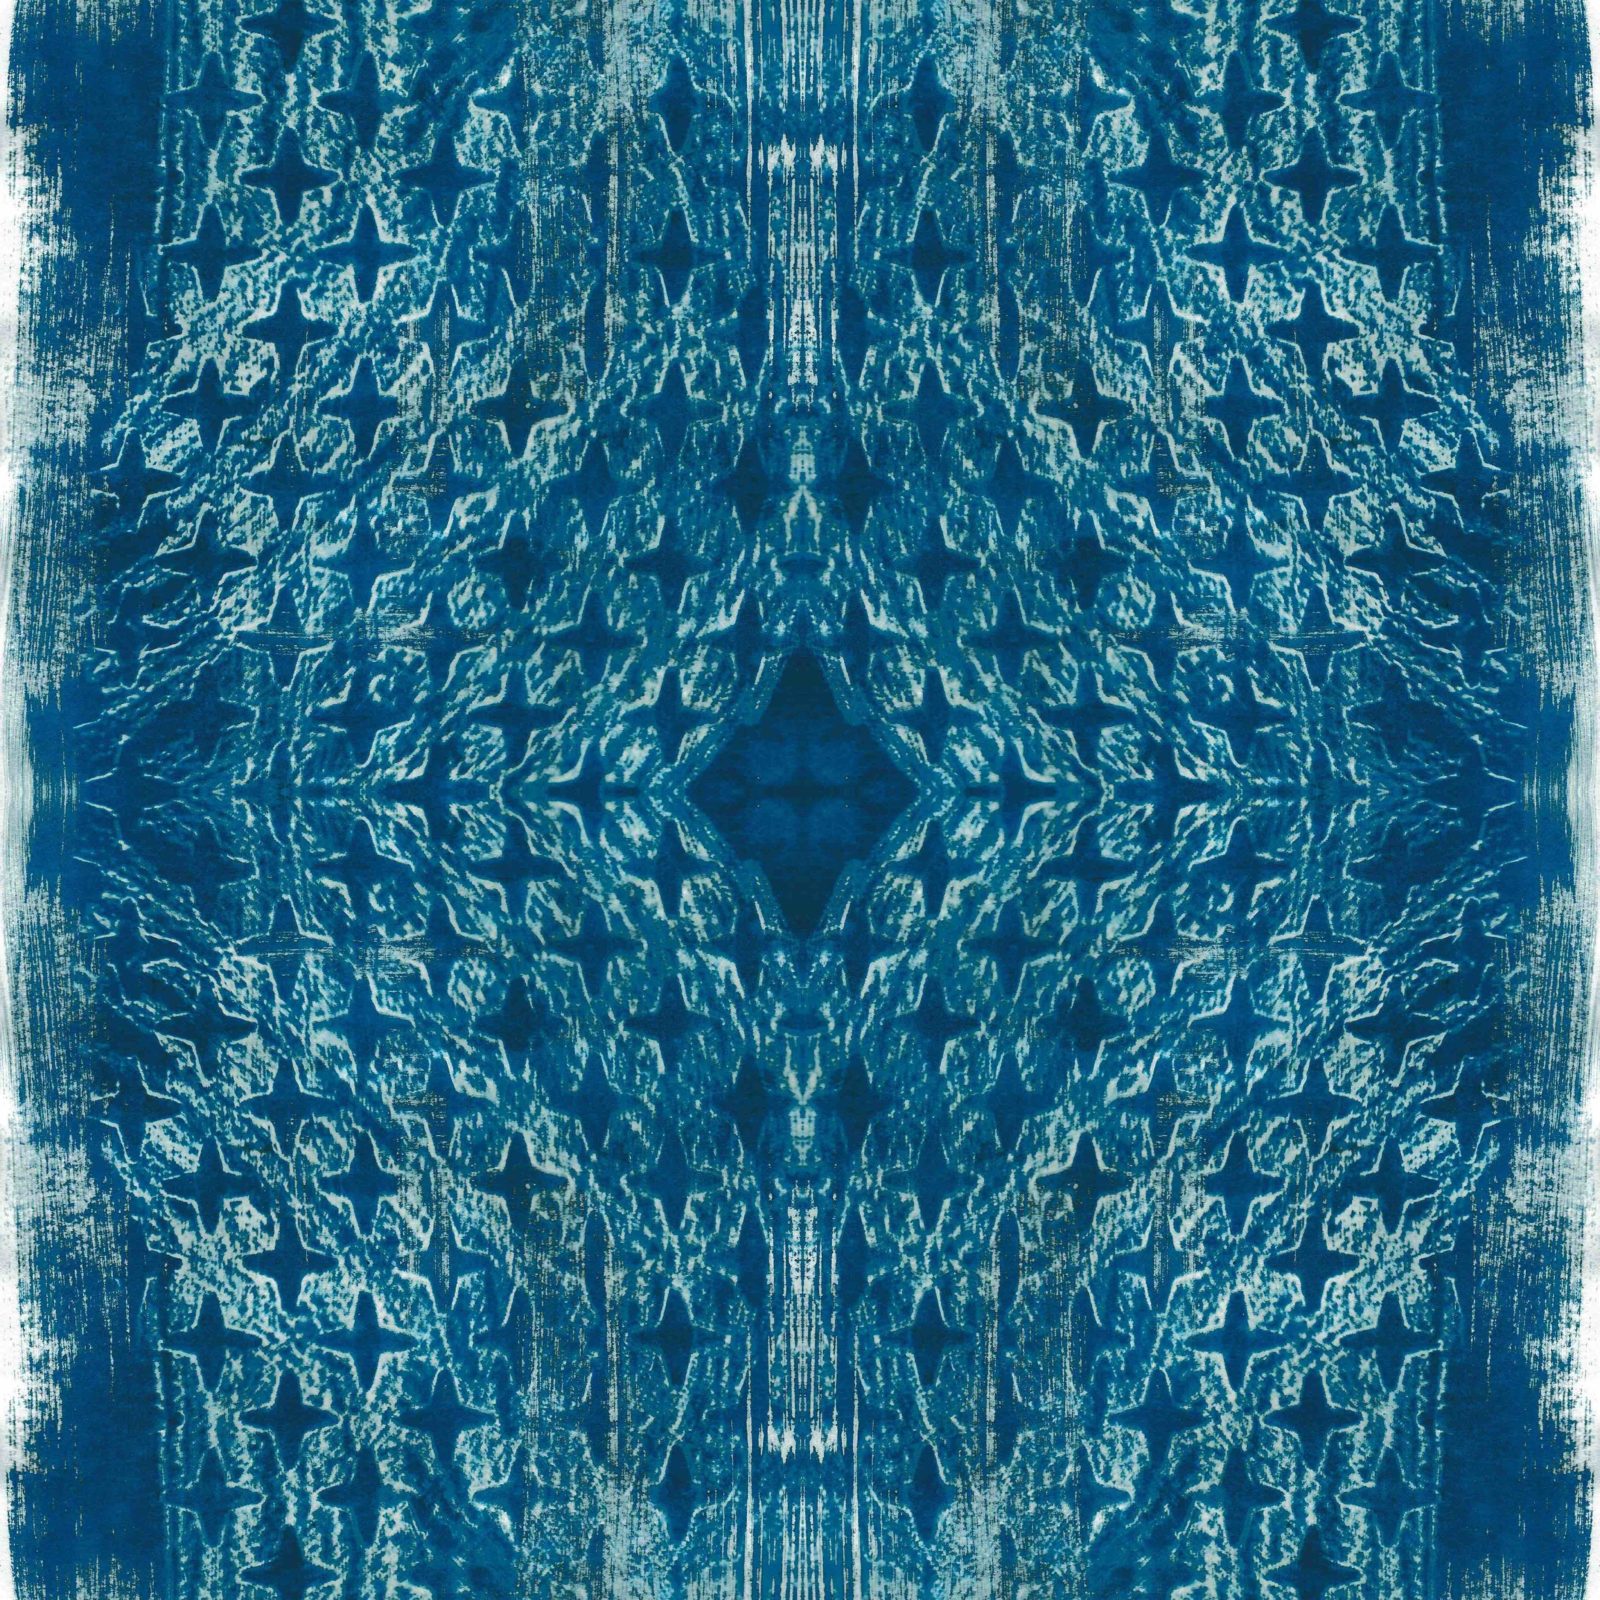 A square blanket decorated with an inky blue design